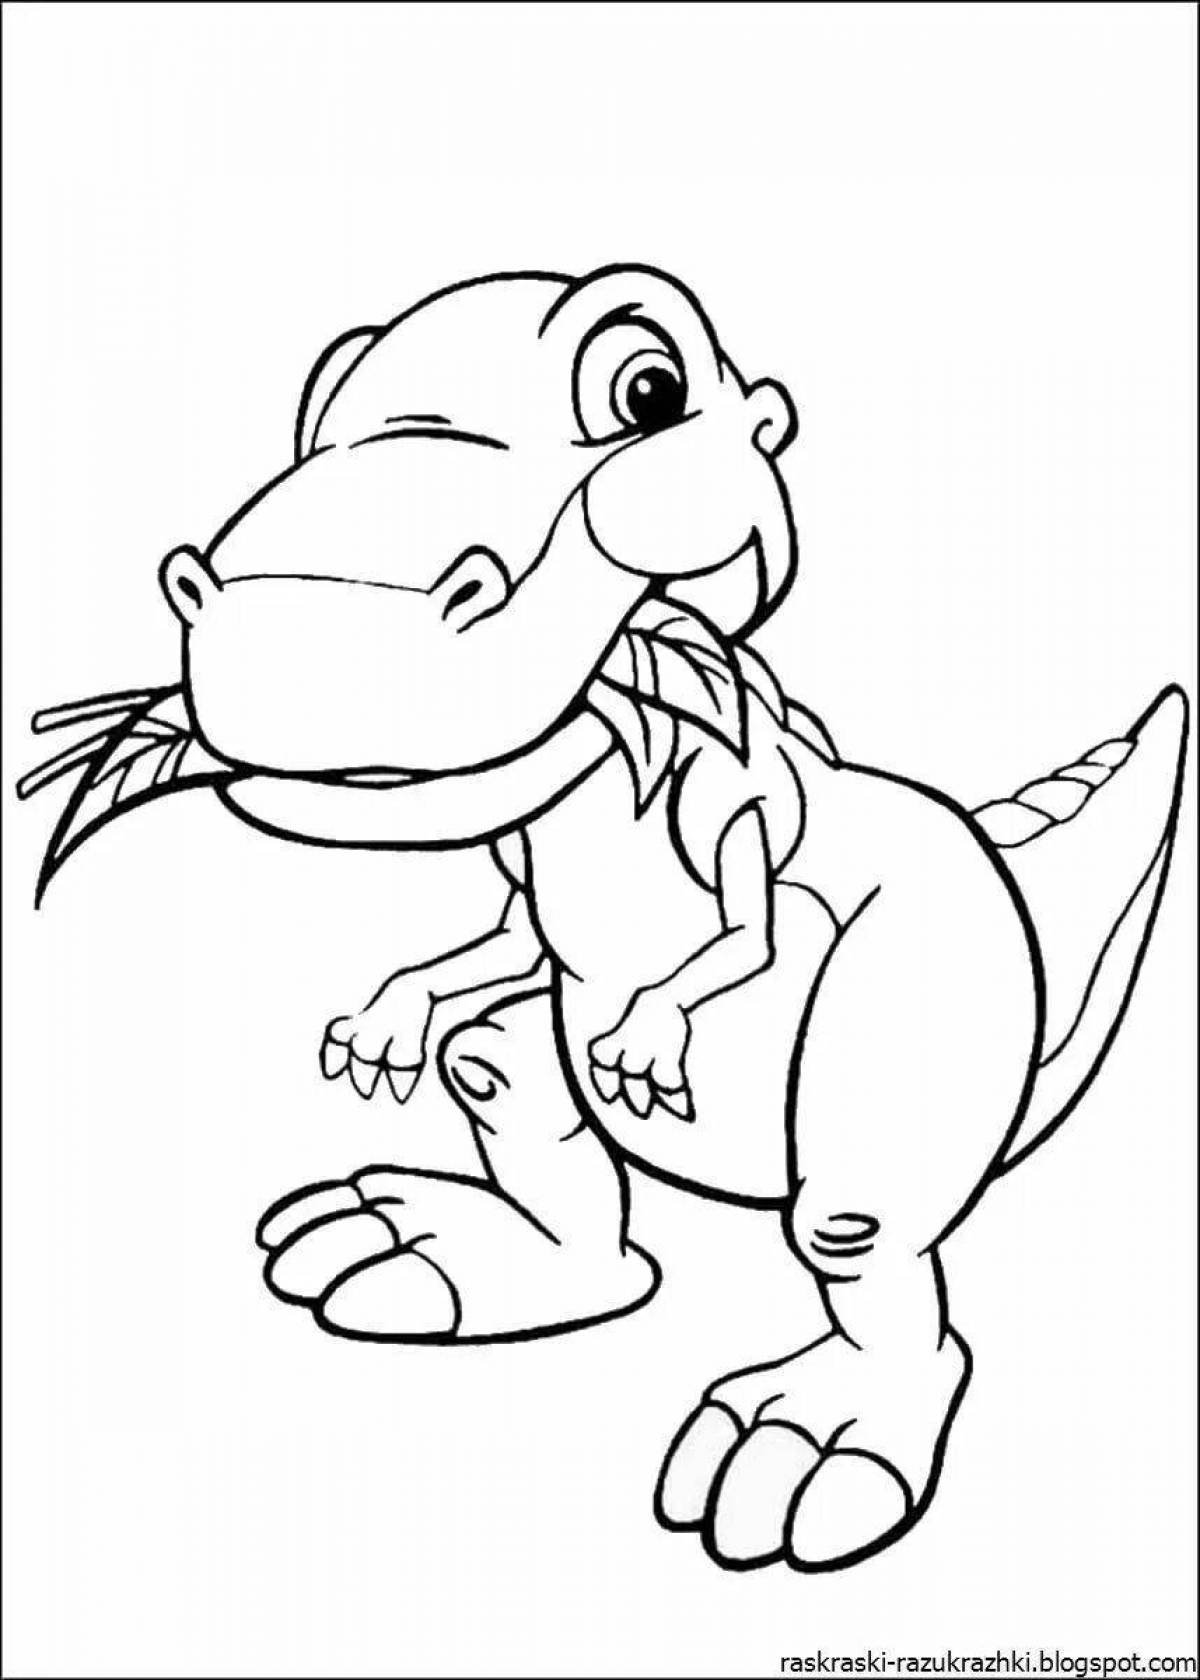 Creative cartoon coloring book for 3-4 year olds